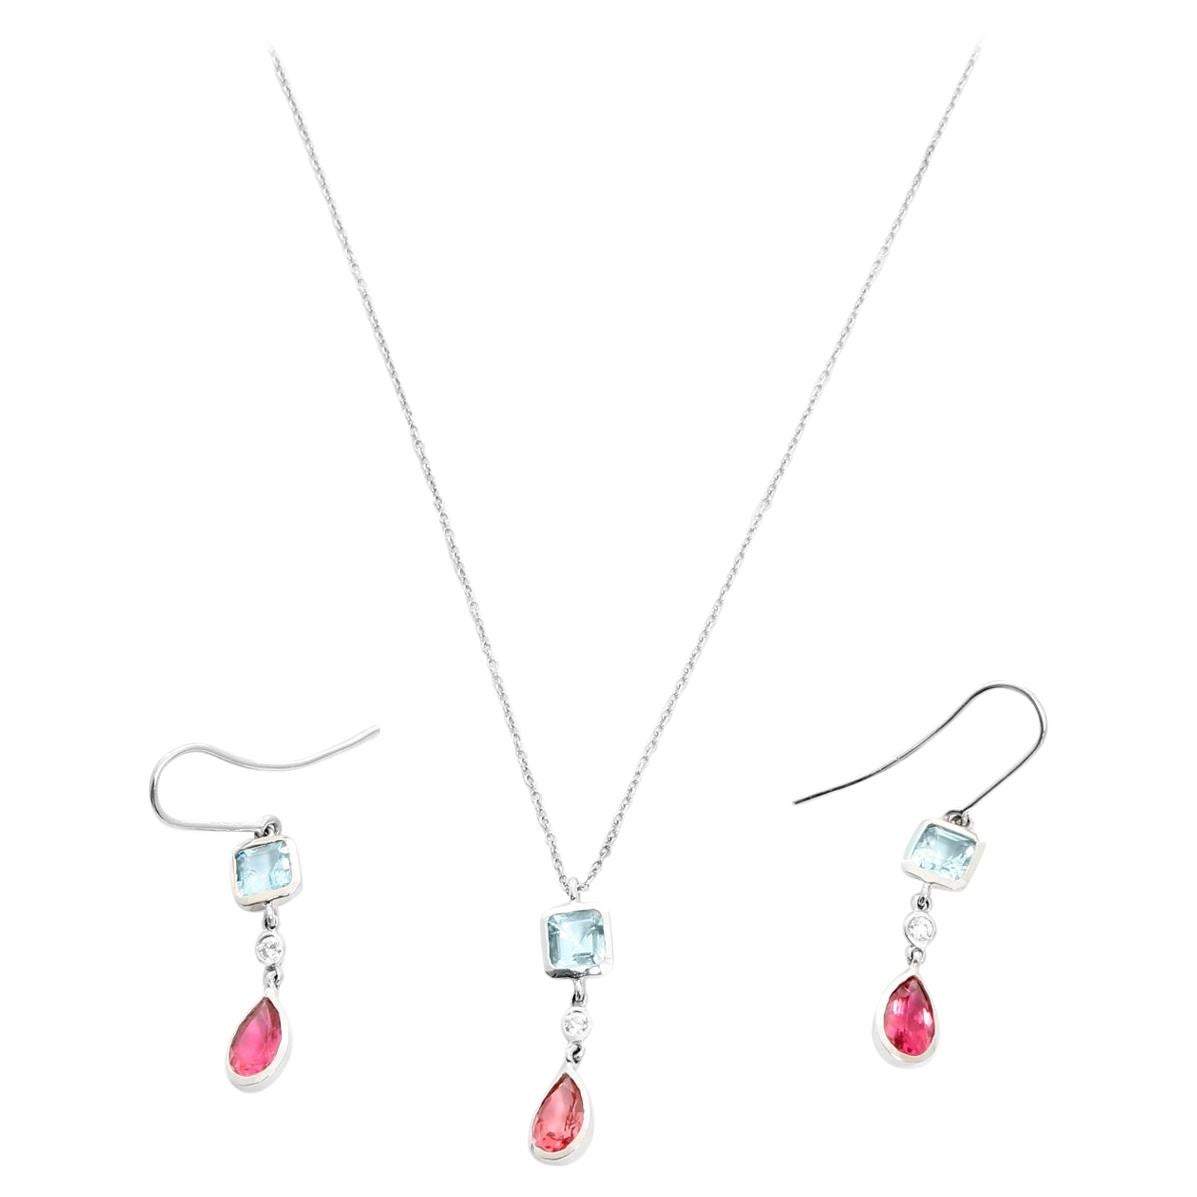 Tiffany & Co. Pink Tourmaline and Aquamarine Earrings and Necklace